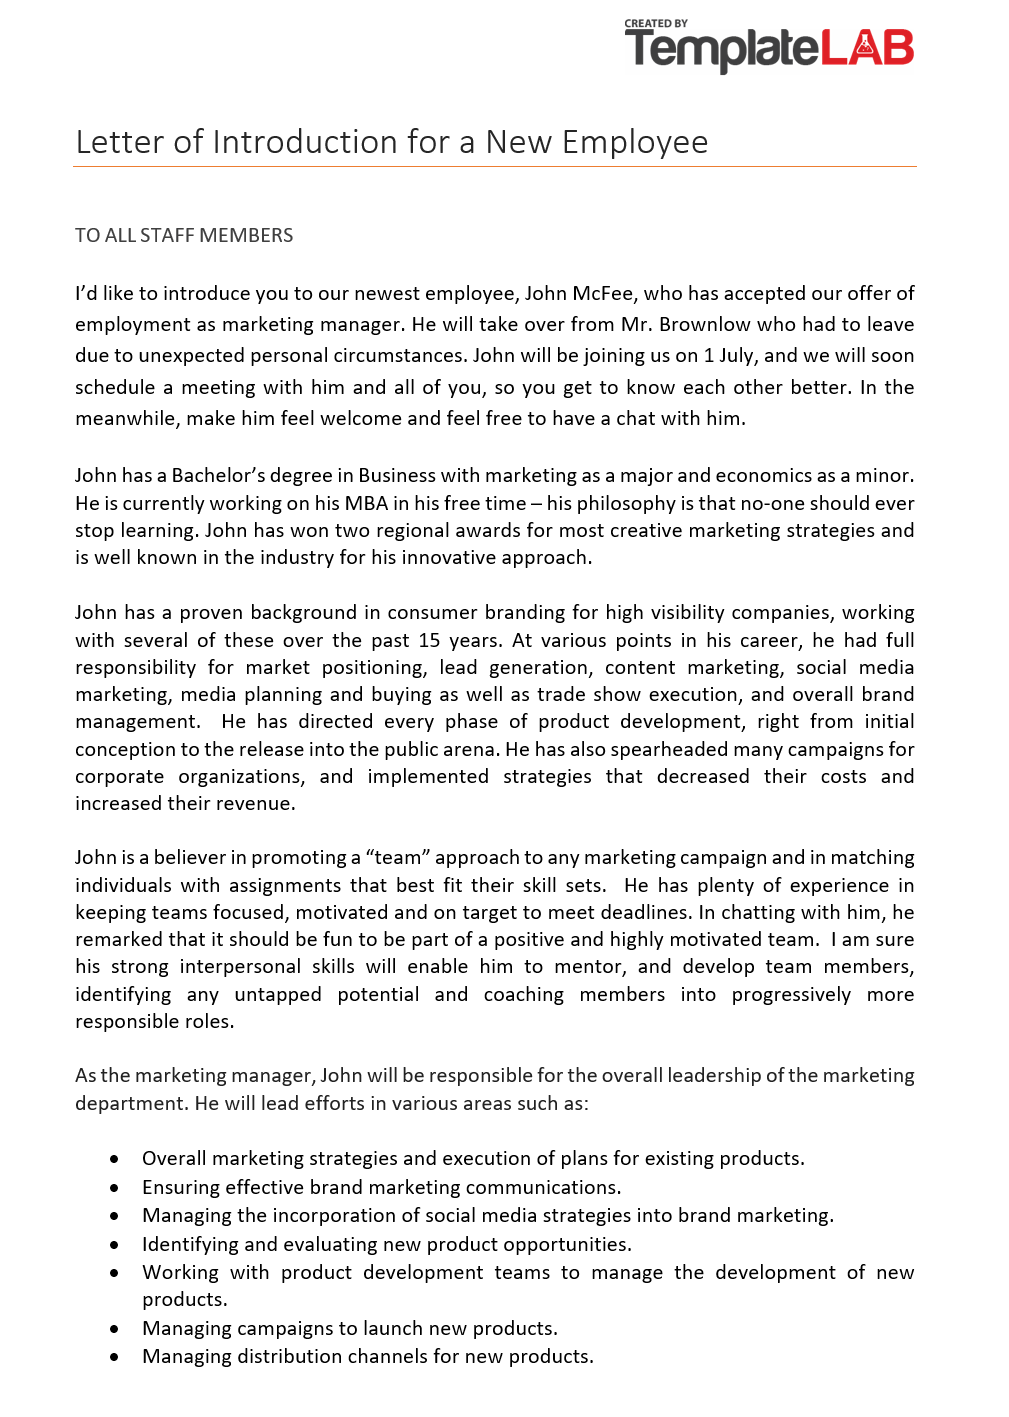 Free Letter of Introduction for a New Employee 1